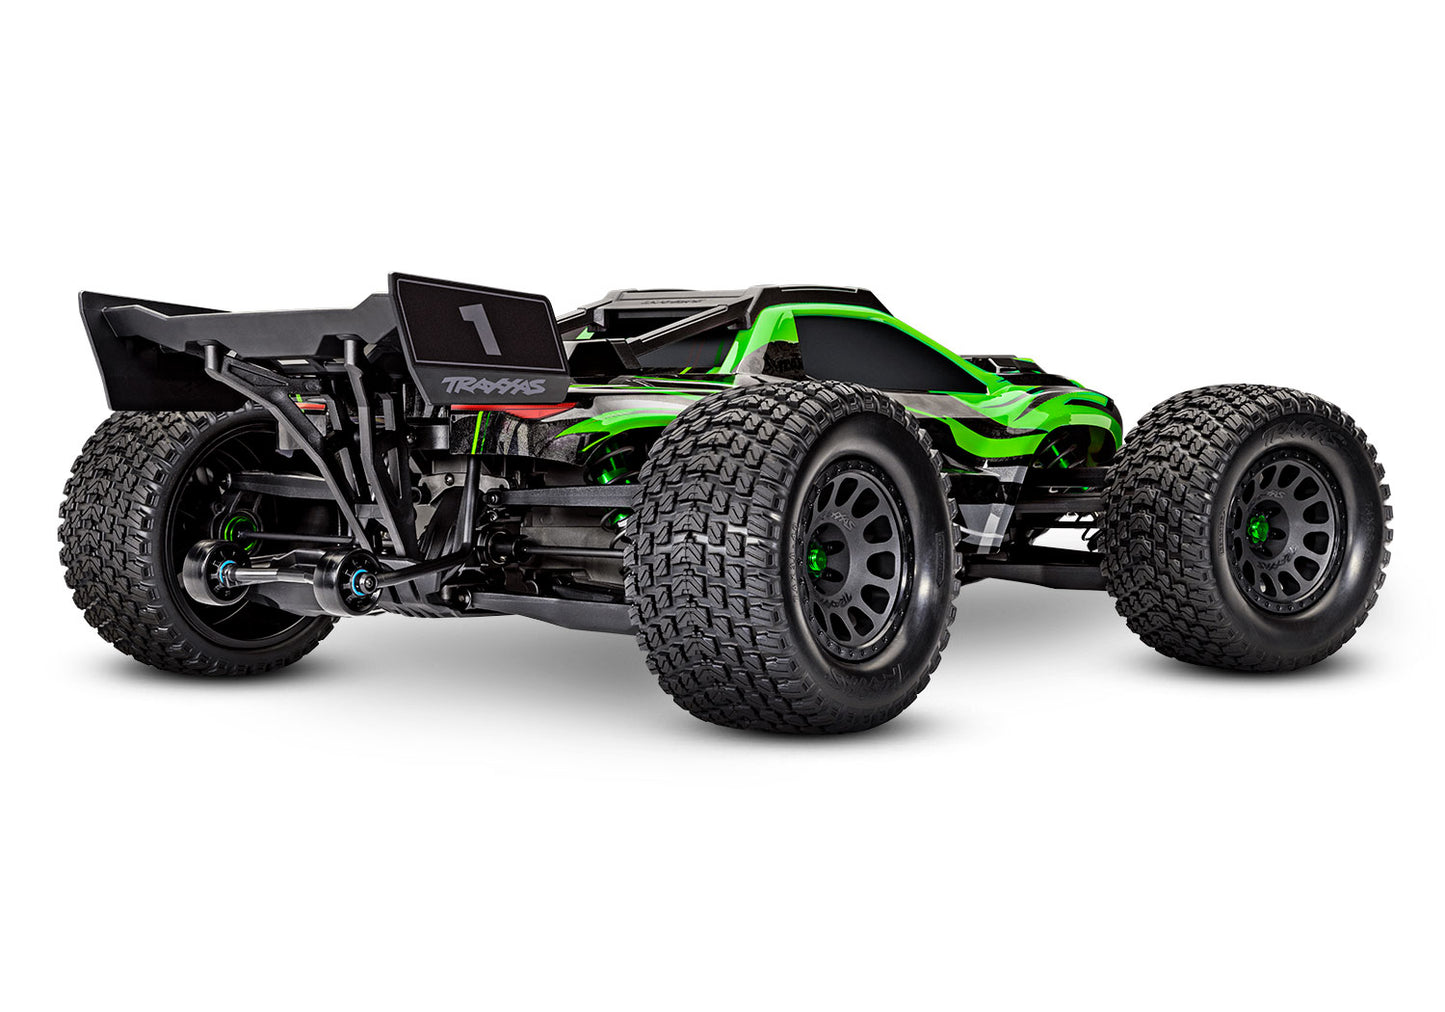 78086-4  XRT Brushless Electric Race Truck Green